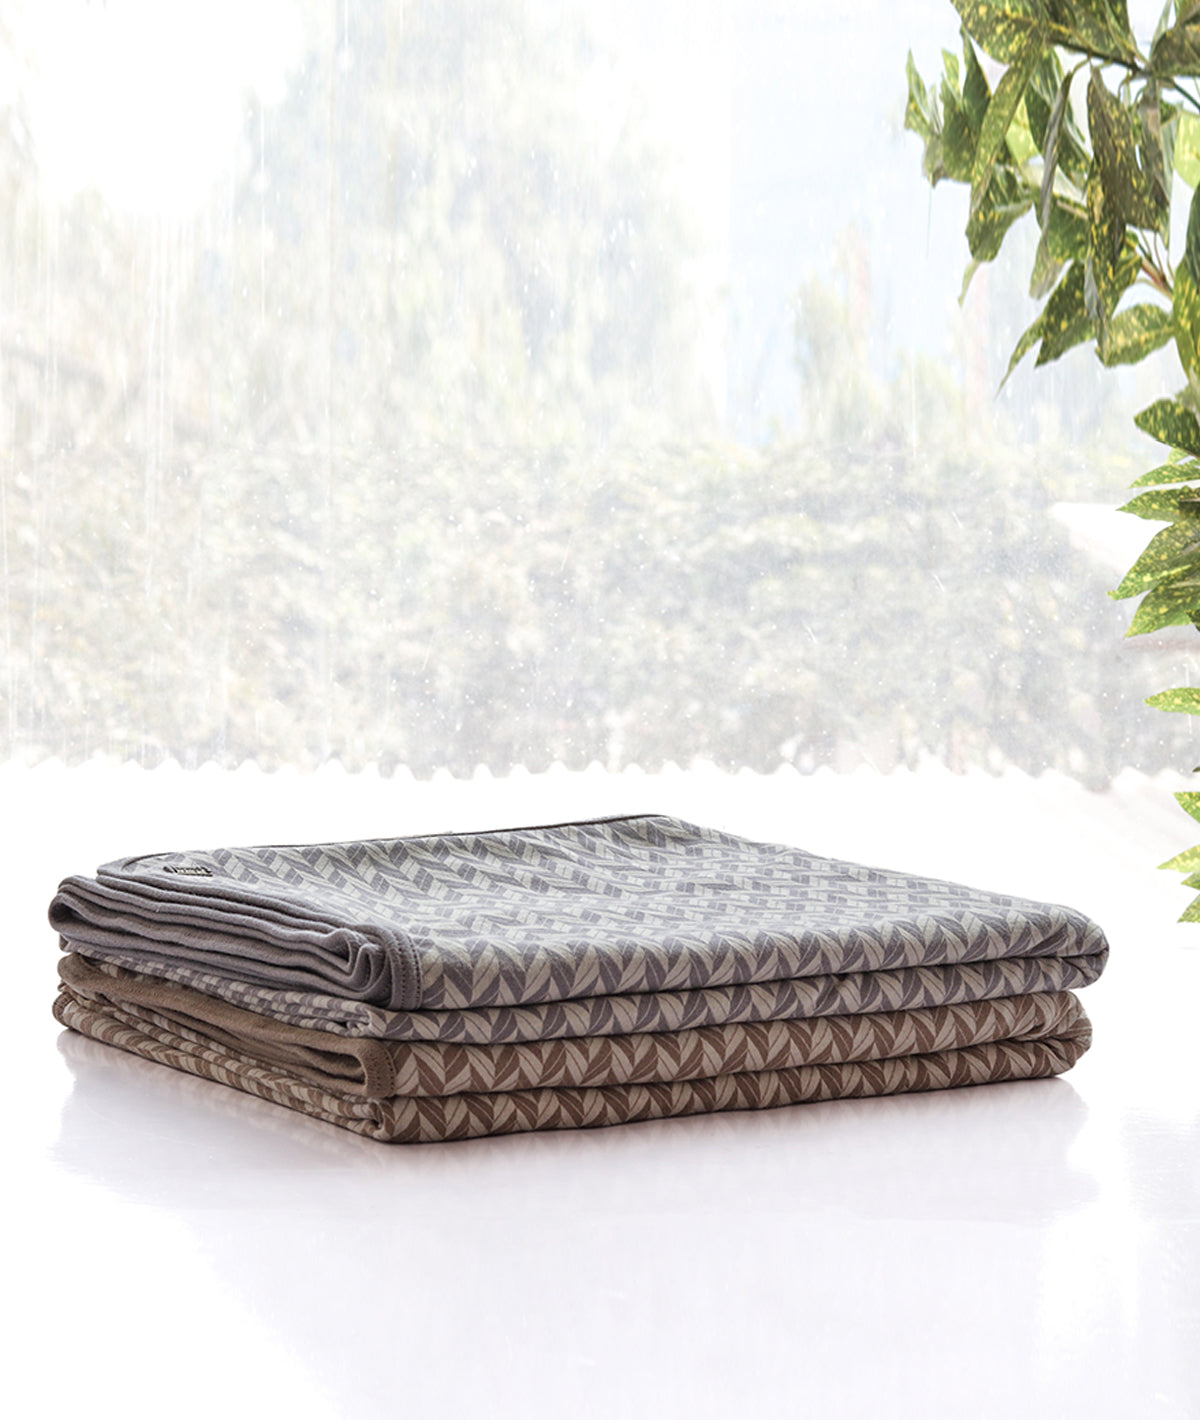 Eleanor Cotton Knitted Single Bed  Ac Blanket / Dohar For Round The Year Use (Set of 2 Pcs) (Light Grey & Natural)